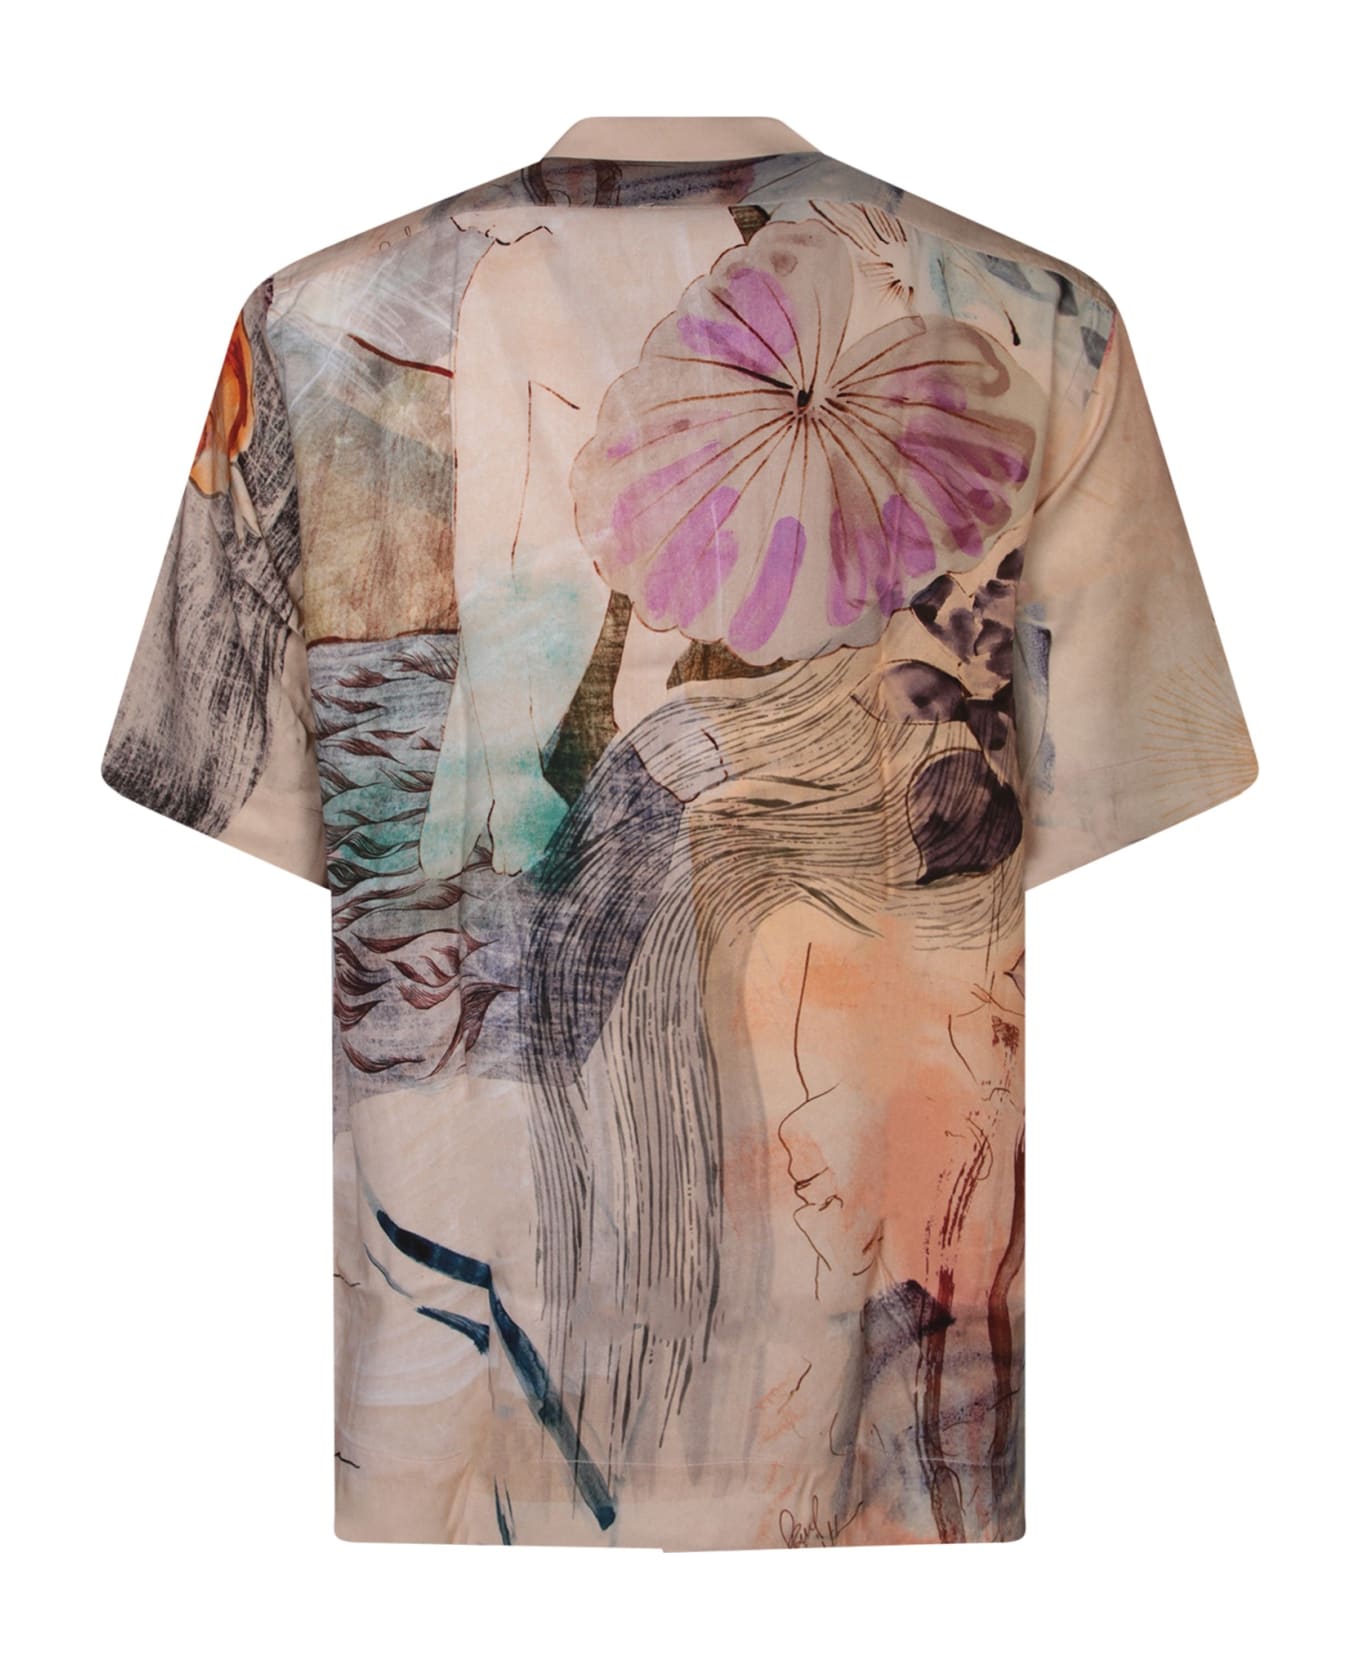 Paul Smith Graphic Printed Short-sleeved Shirt - Beige